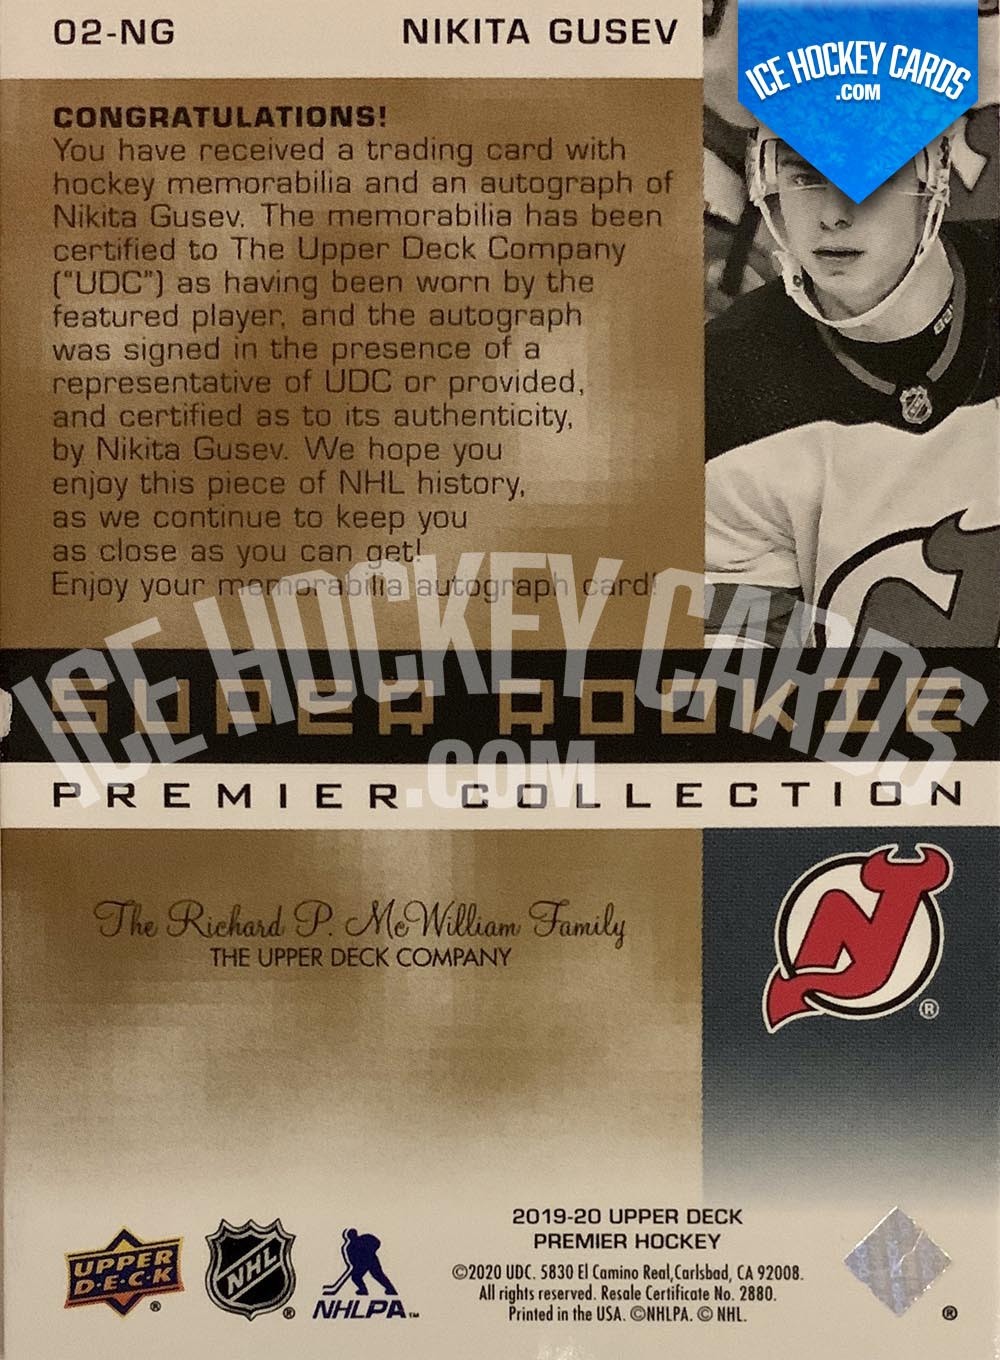 Upper Deck - Premier 2019-20 - Nikita Gusev Super Rookie Premier Collection Rookie Auto Patch Card # to 99 back